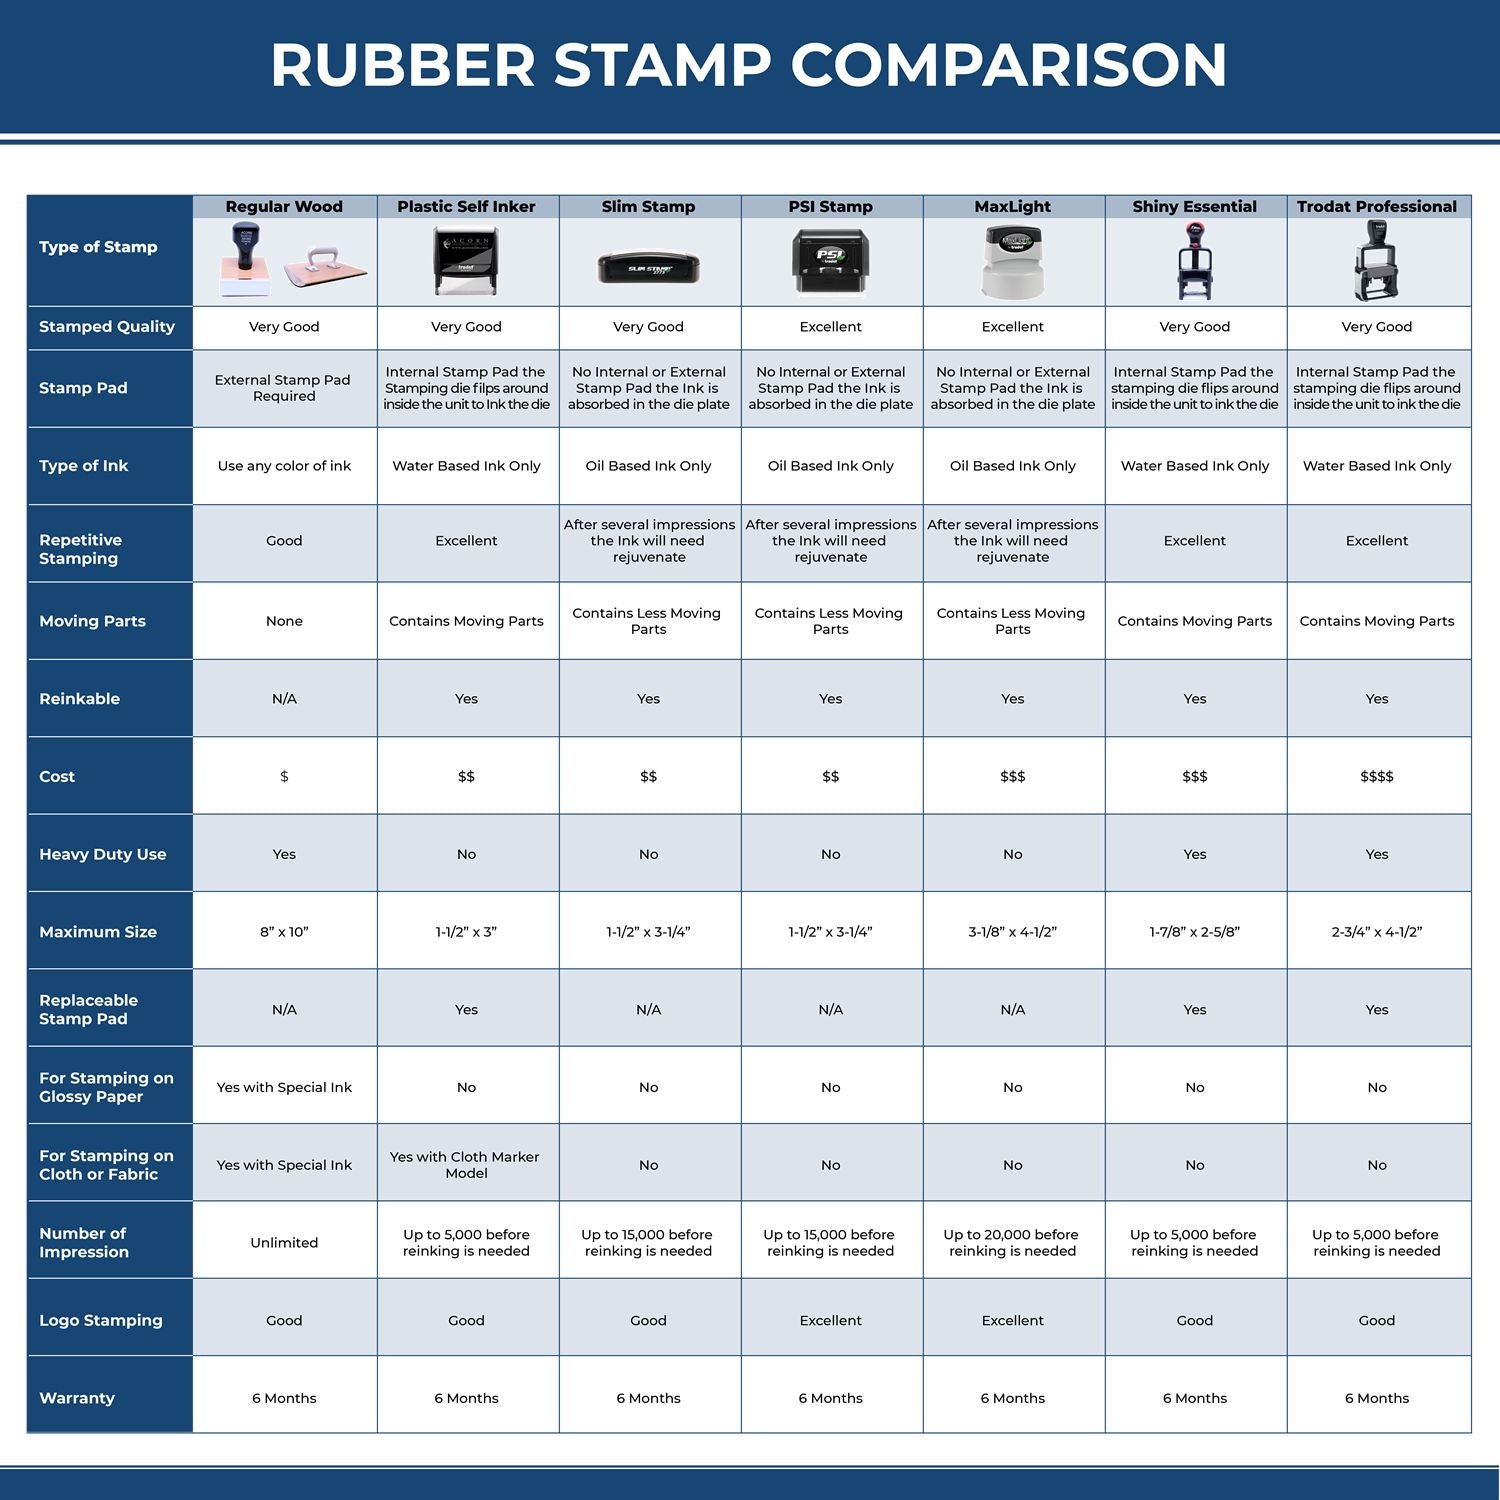 A comparison chart for the different types of mount models available for the South Dakota Professional Engineer Seal Stamp.